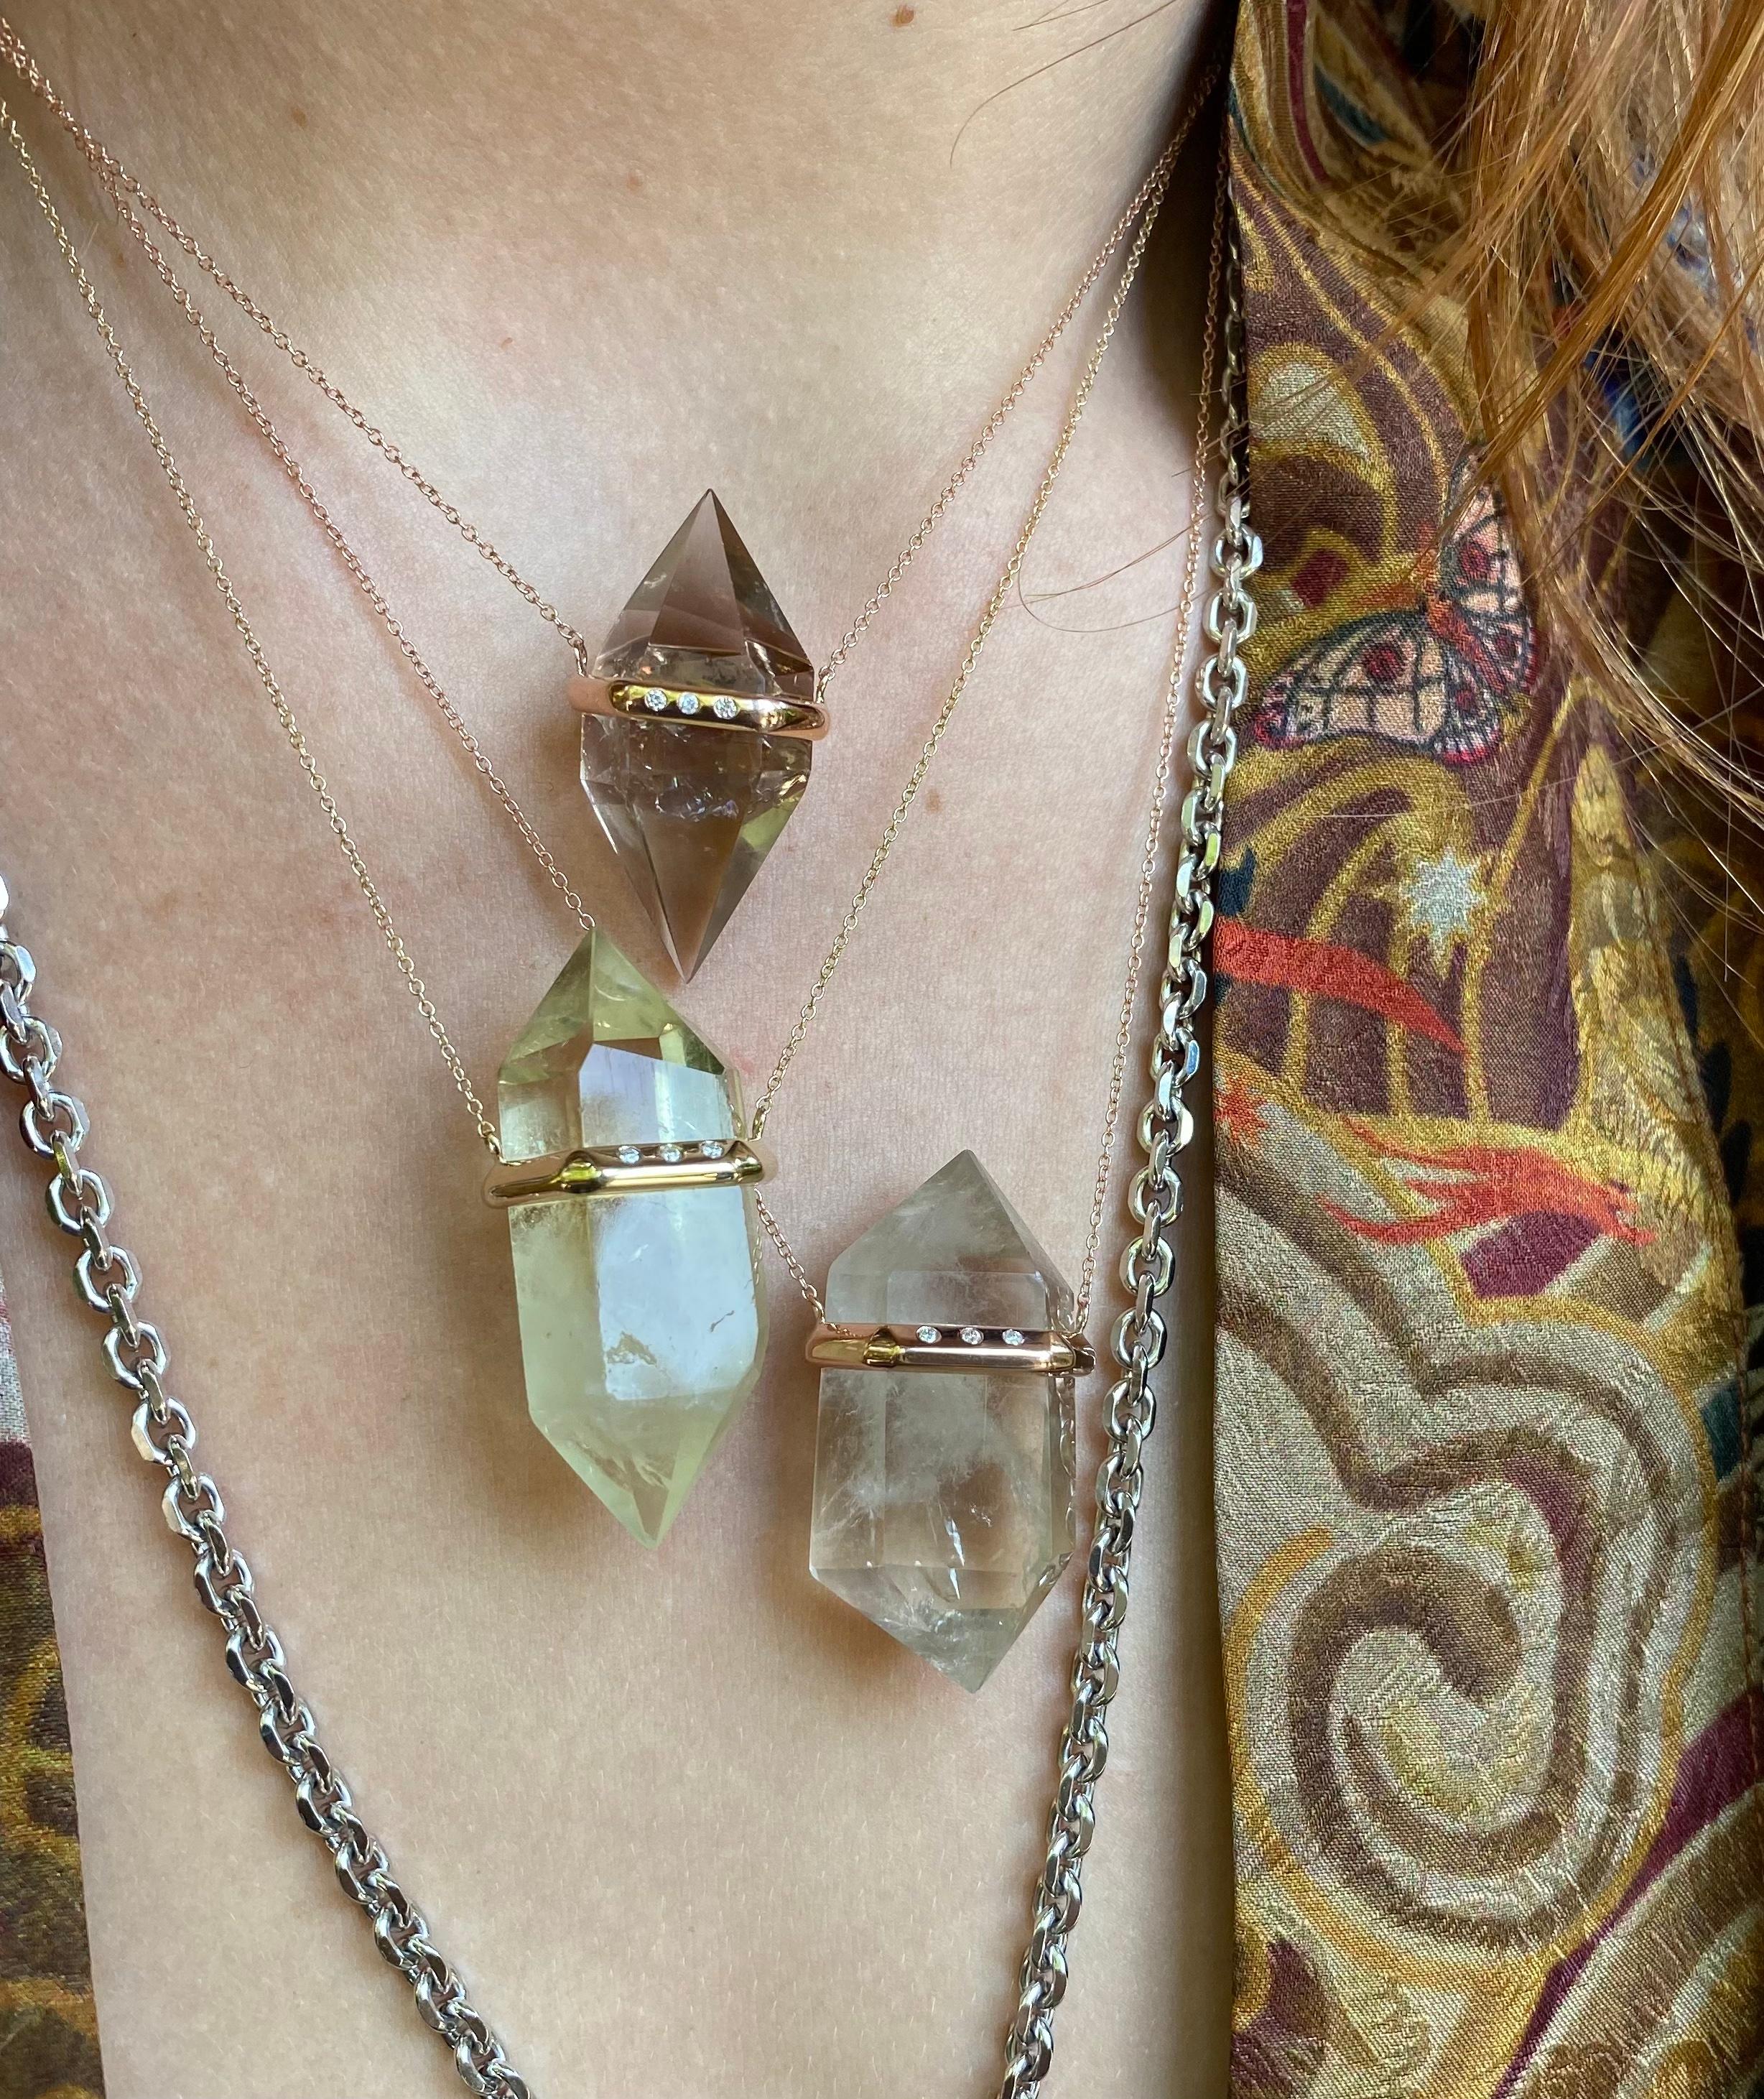 Handmade, one-of-a-kind, double terminated Smokey Quartz Crystal with 3 pave diamonds set in 14k rose gold.

Smokey Quartz Attributes: balance, protection, grounding. 

All House of RAVN Crystals are securely pinned in place. No glue.